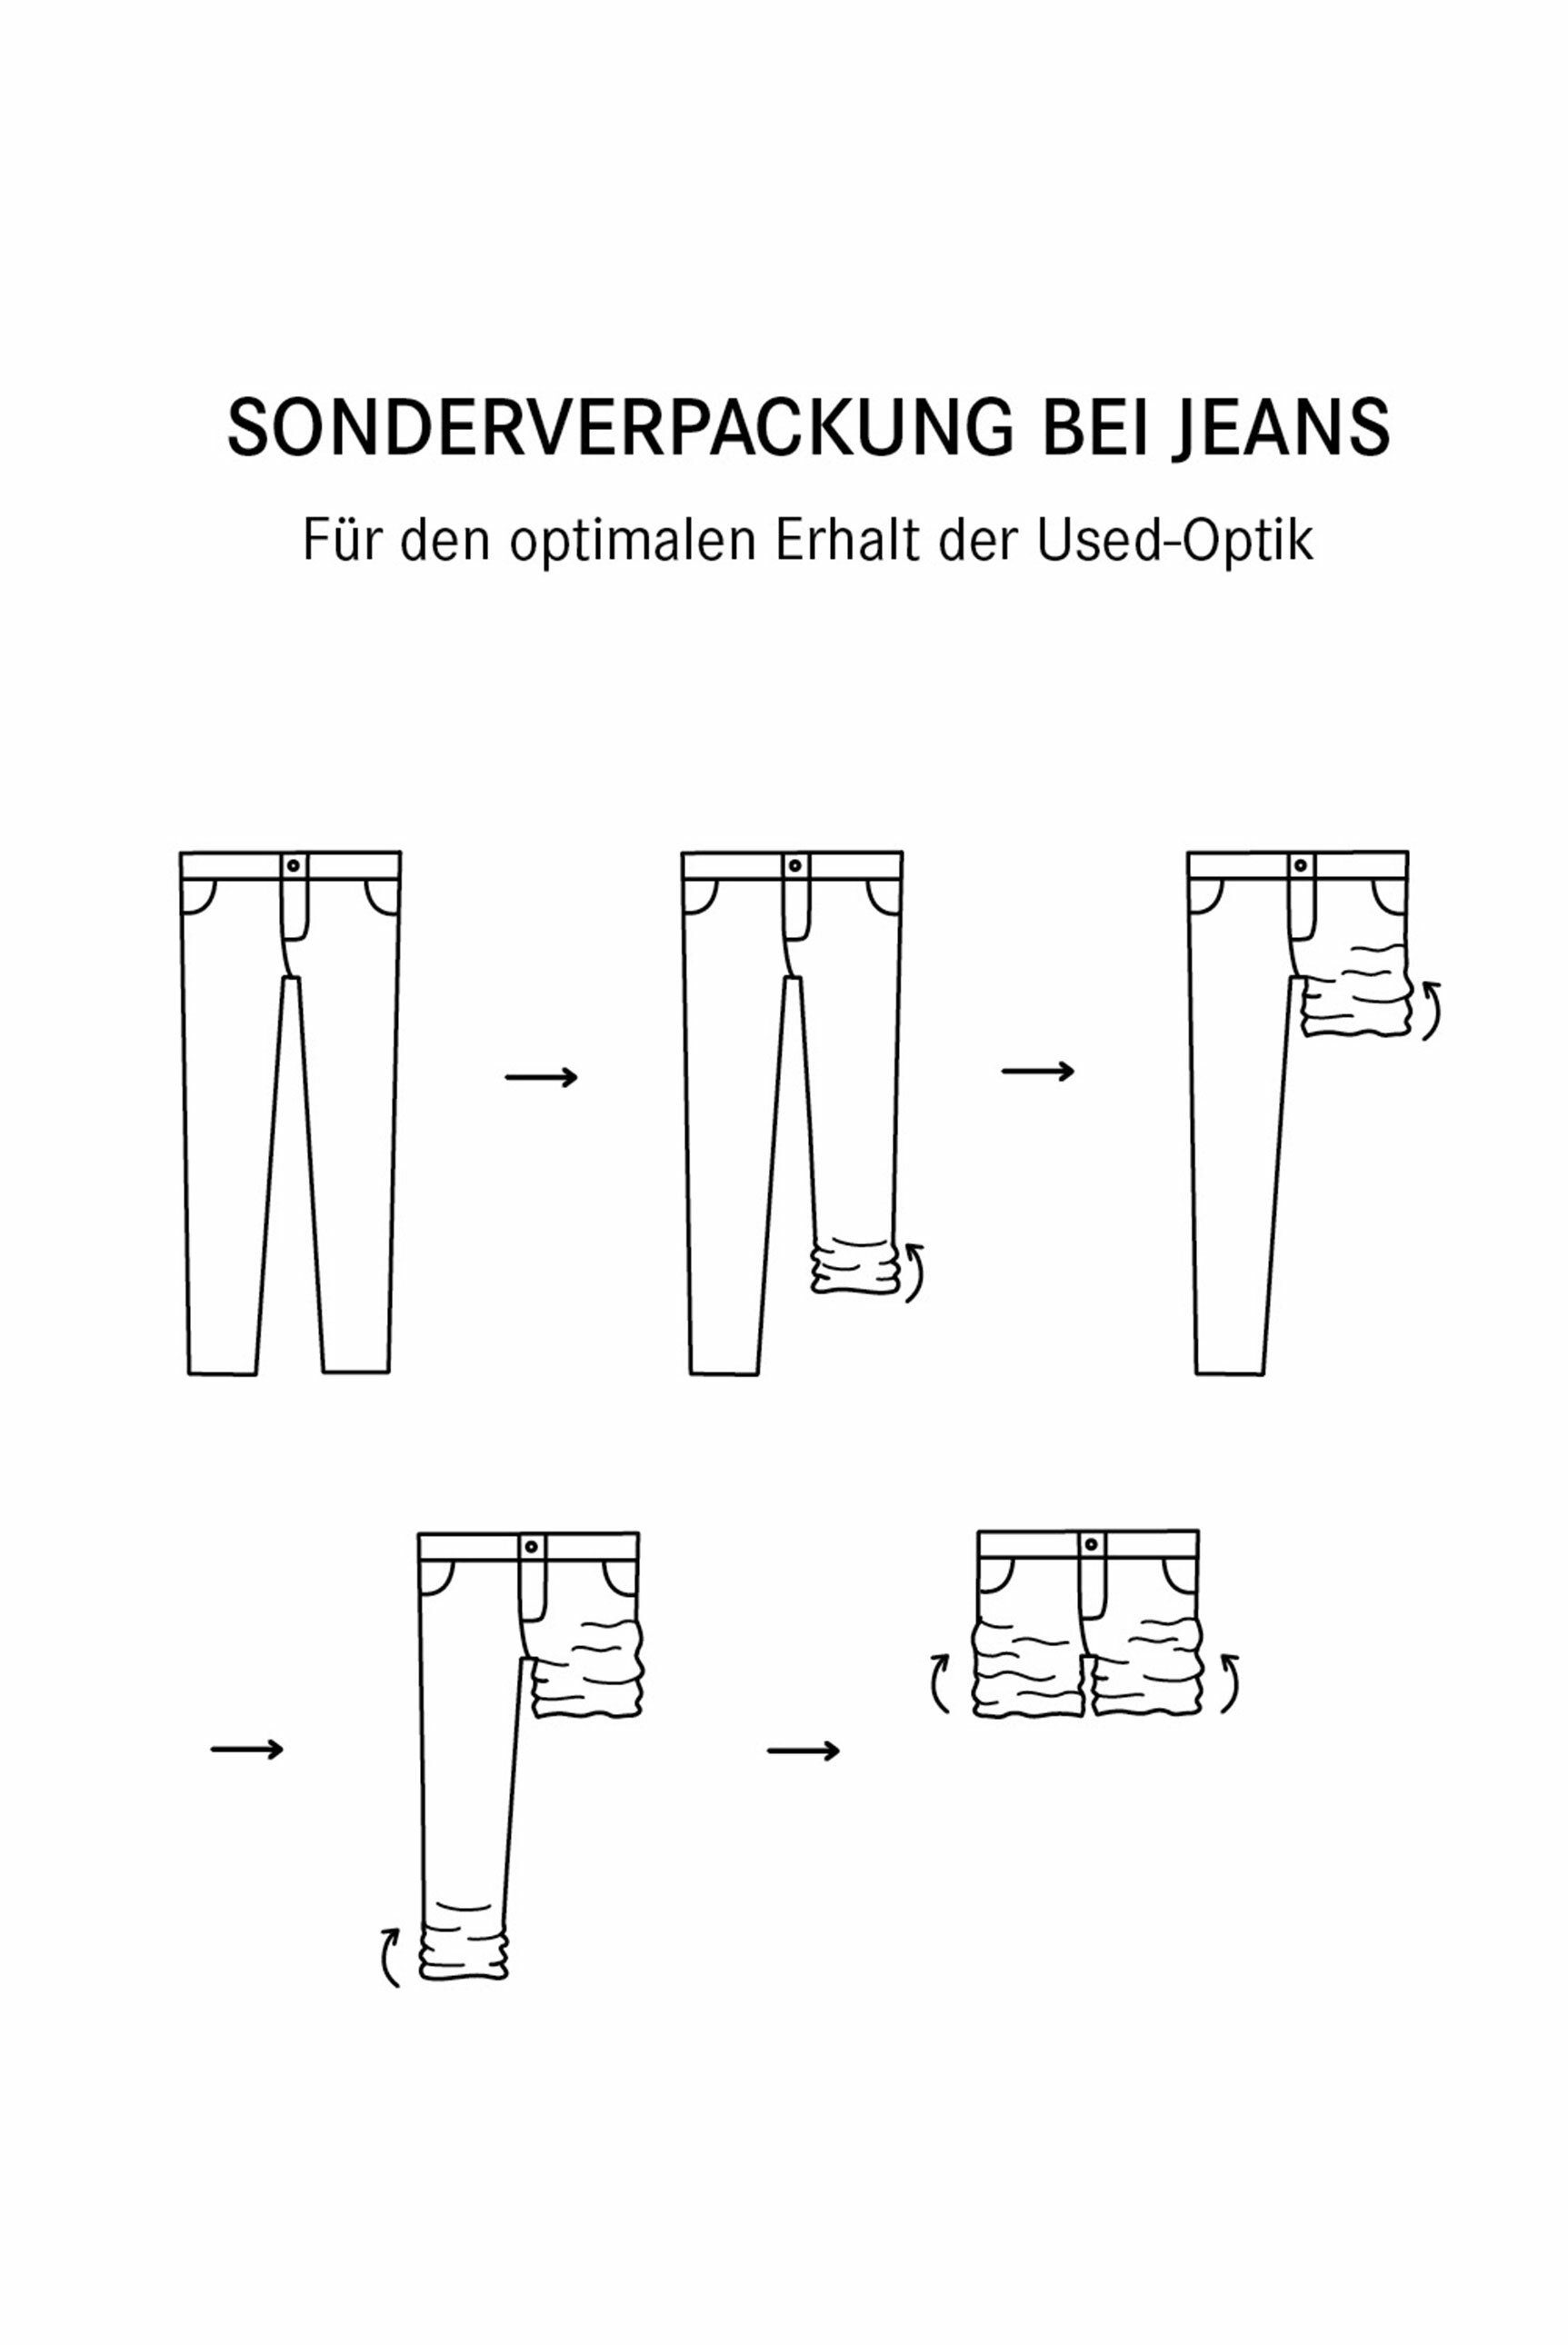 Regular-fit-Jeans mit DAVID NI:CO CAMP Used-Waschung